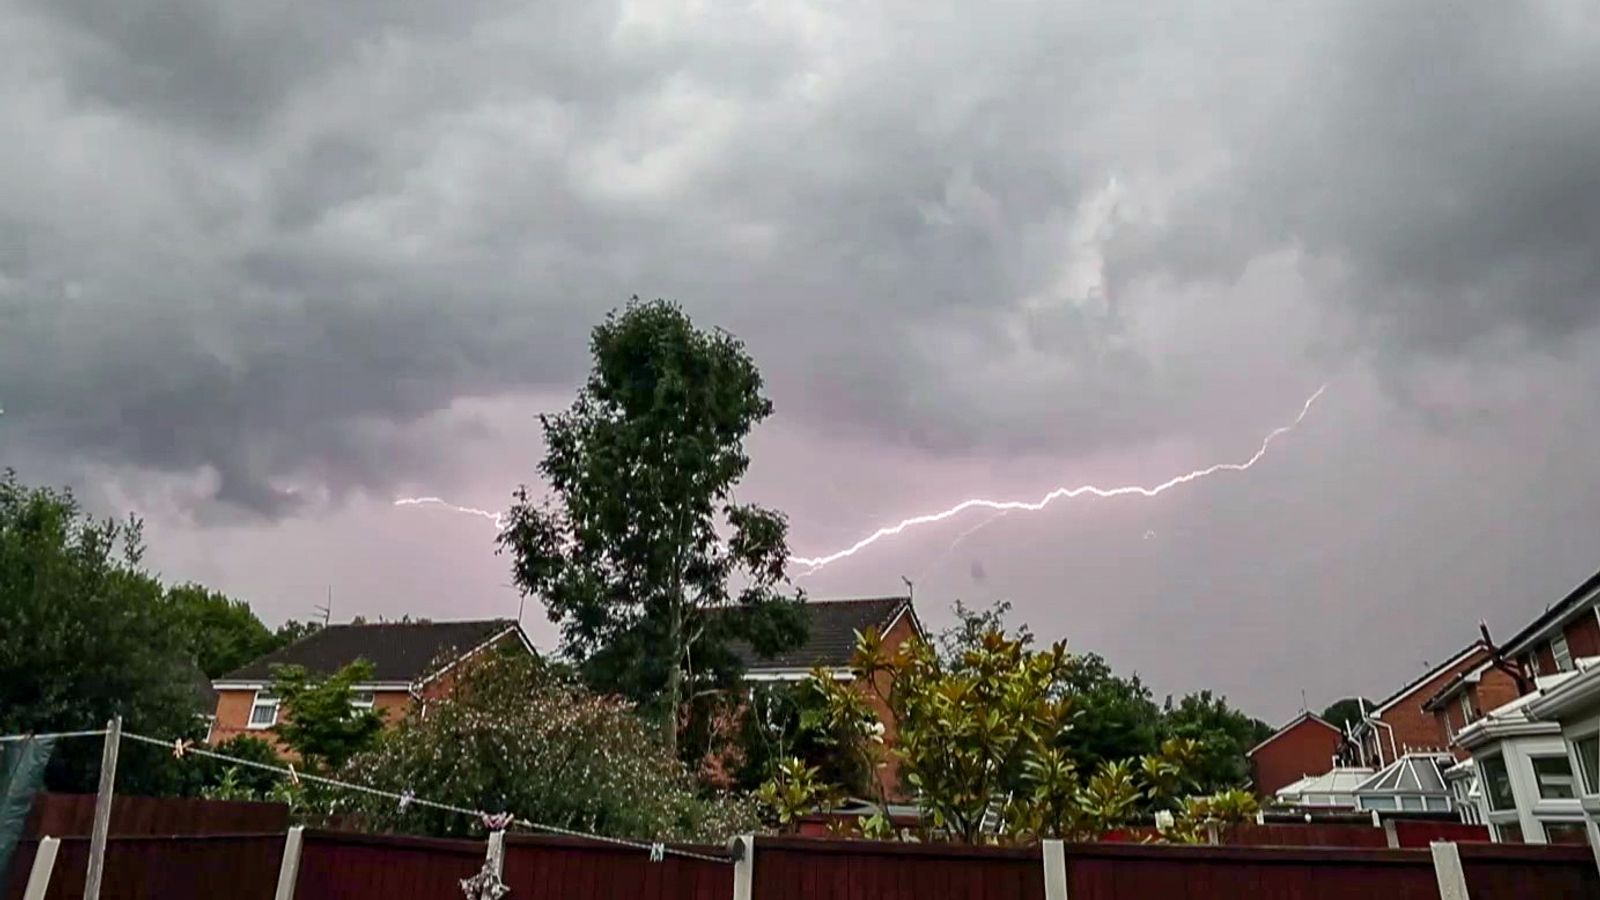 UK weather: Warning of 'danger to life' as thunderstorms strike most of country